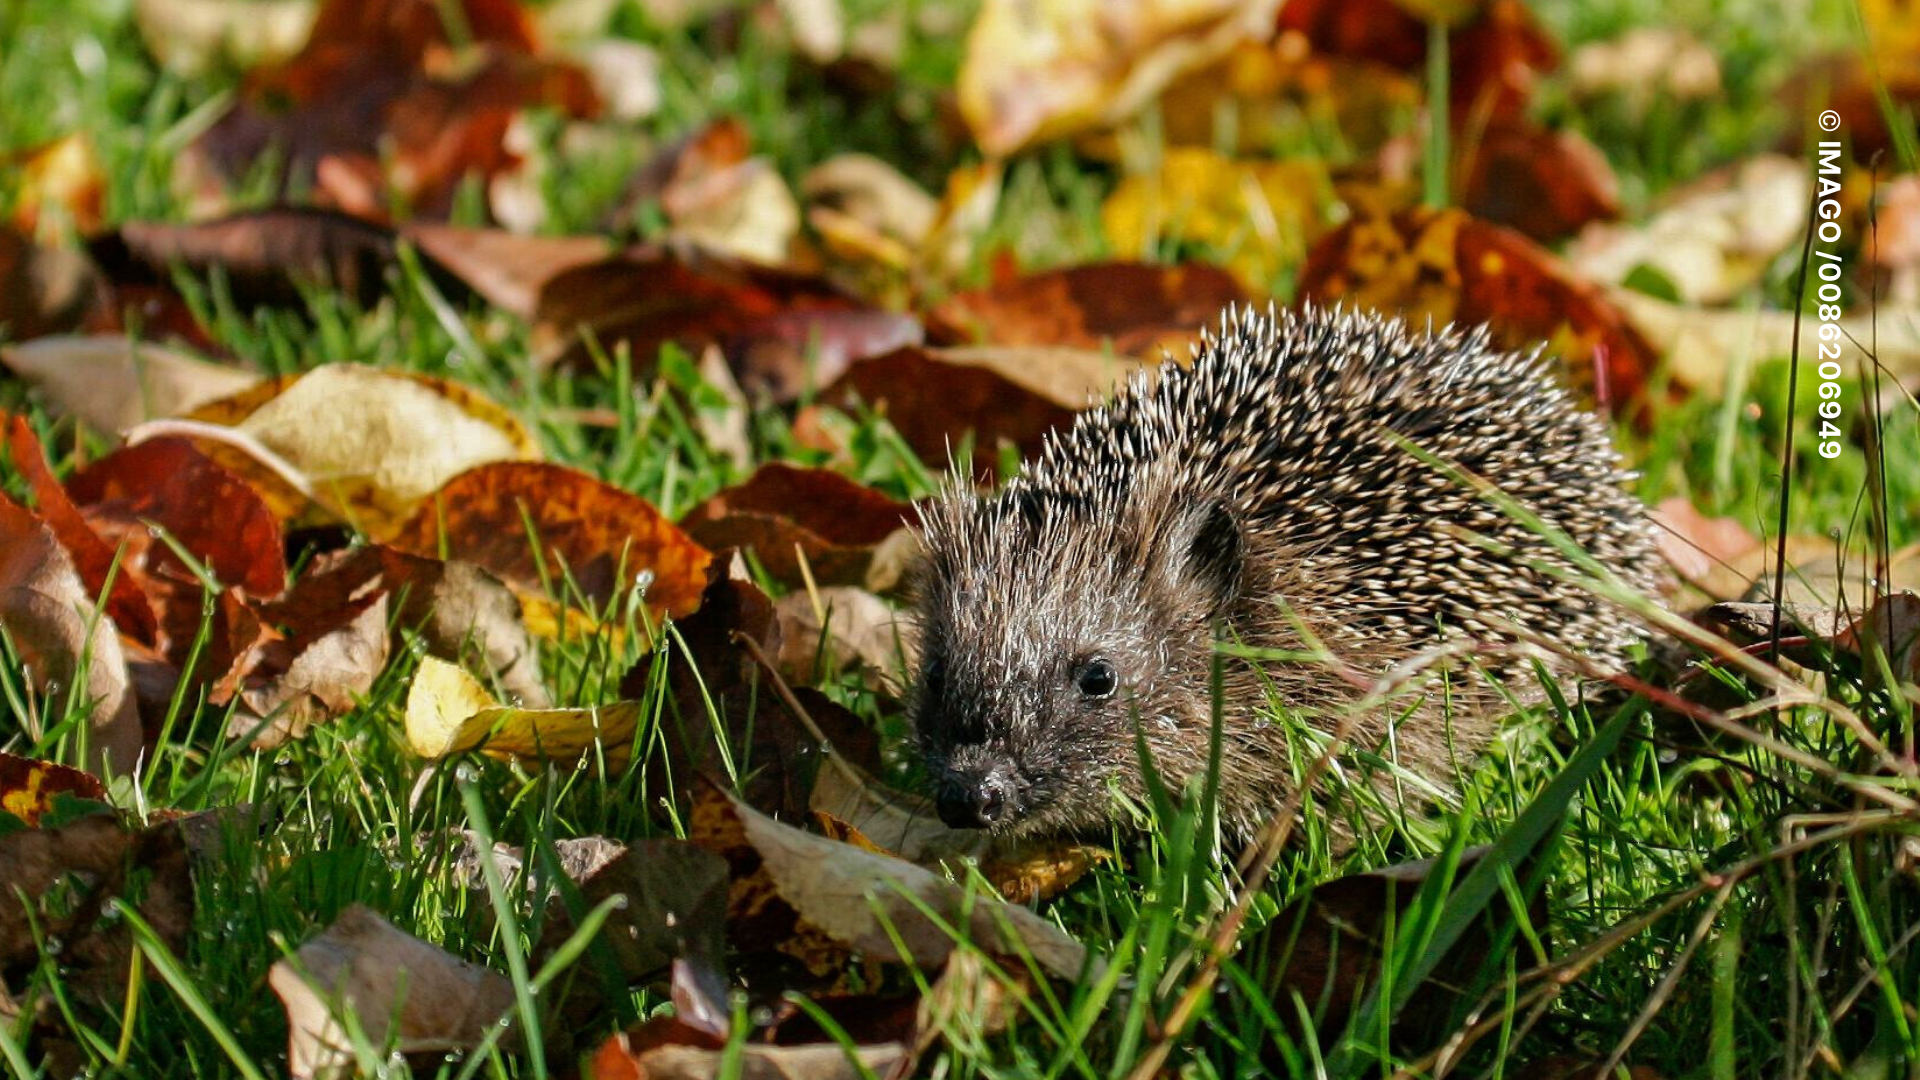 If you want to create an optimal habitat for hedgehogs, leave the lawnmower out more often